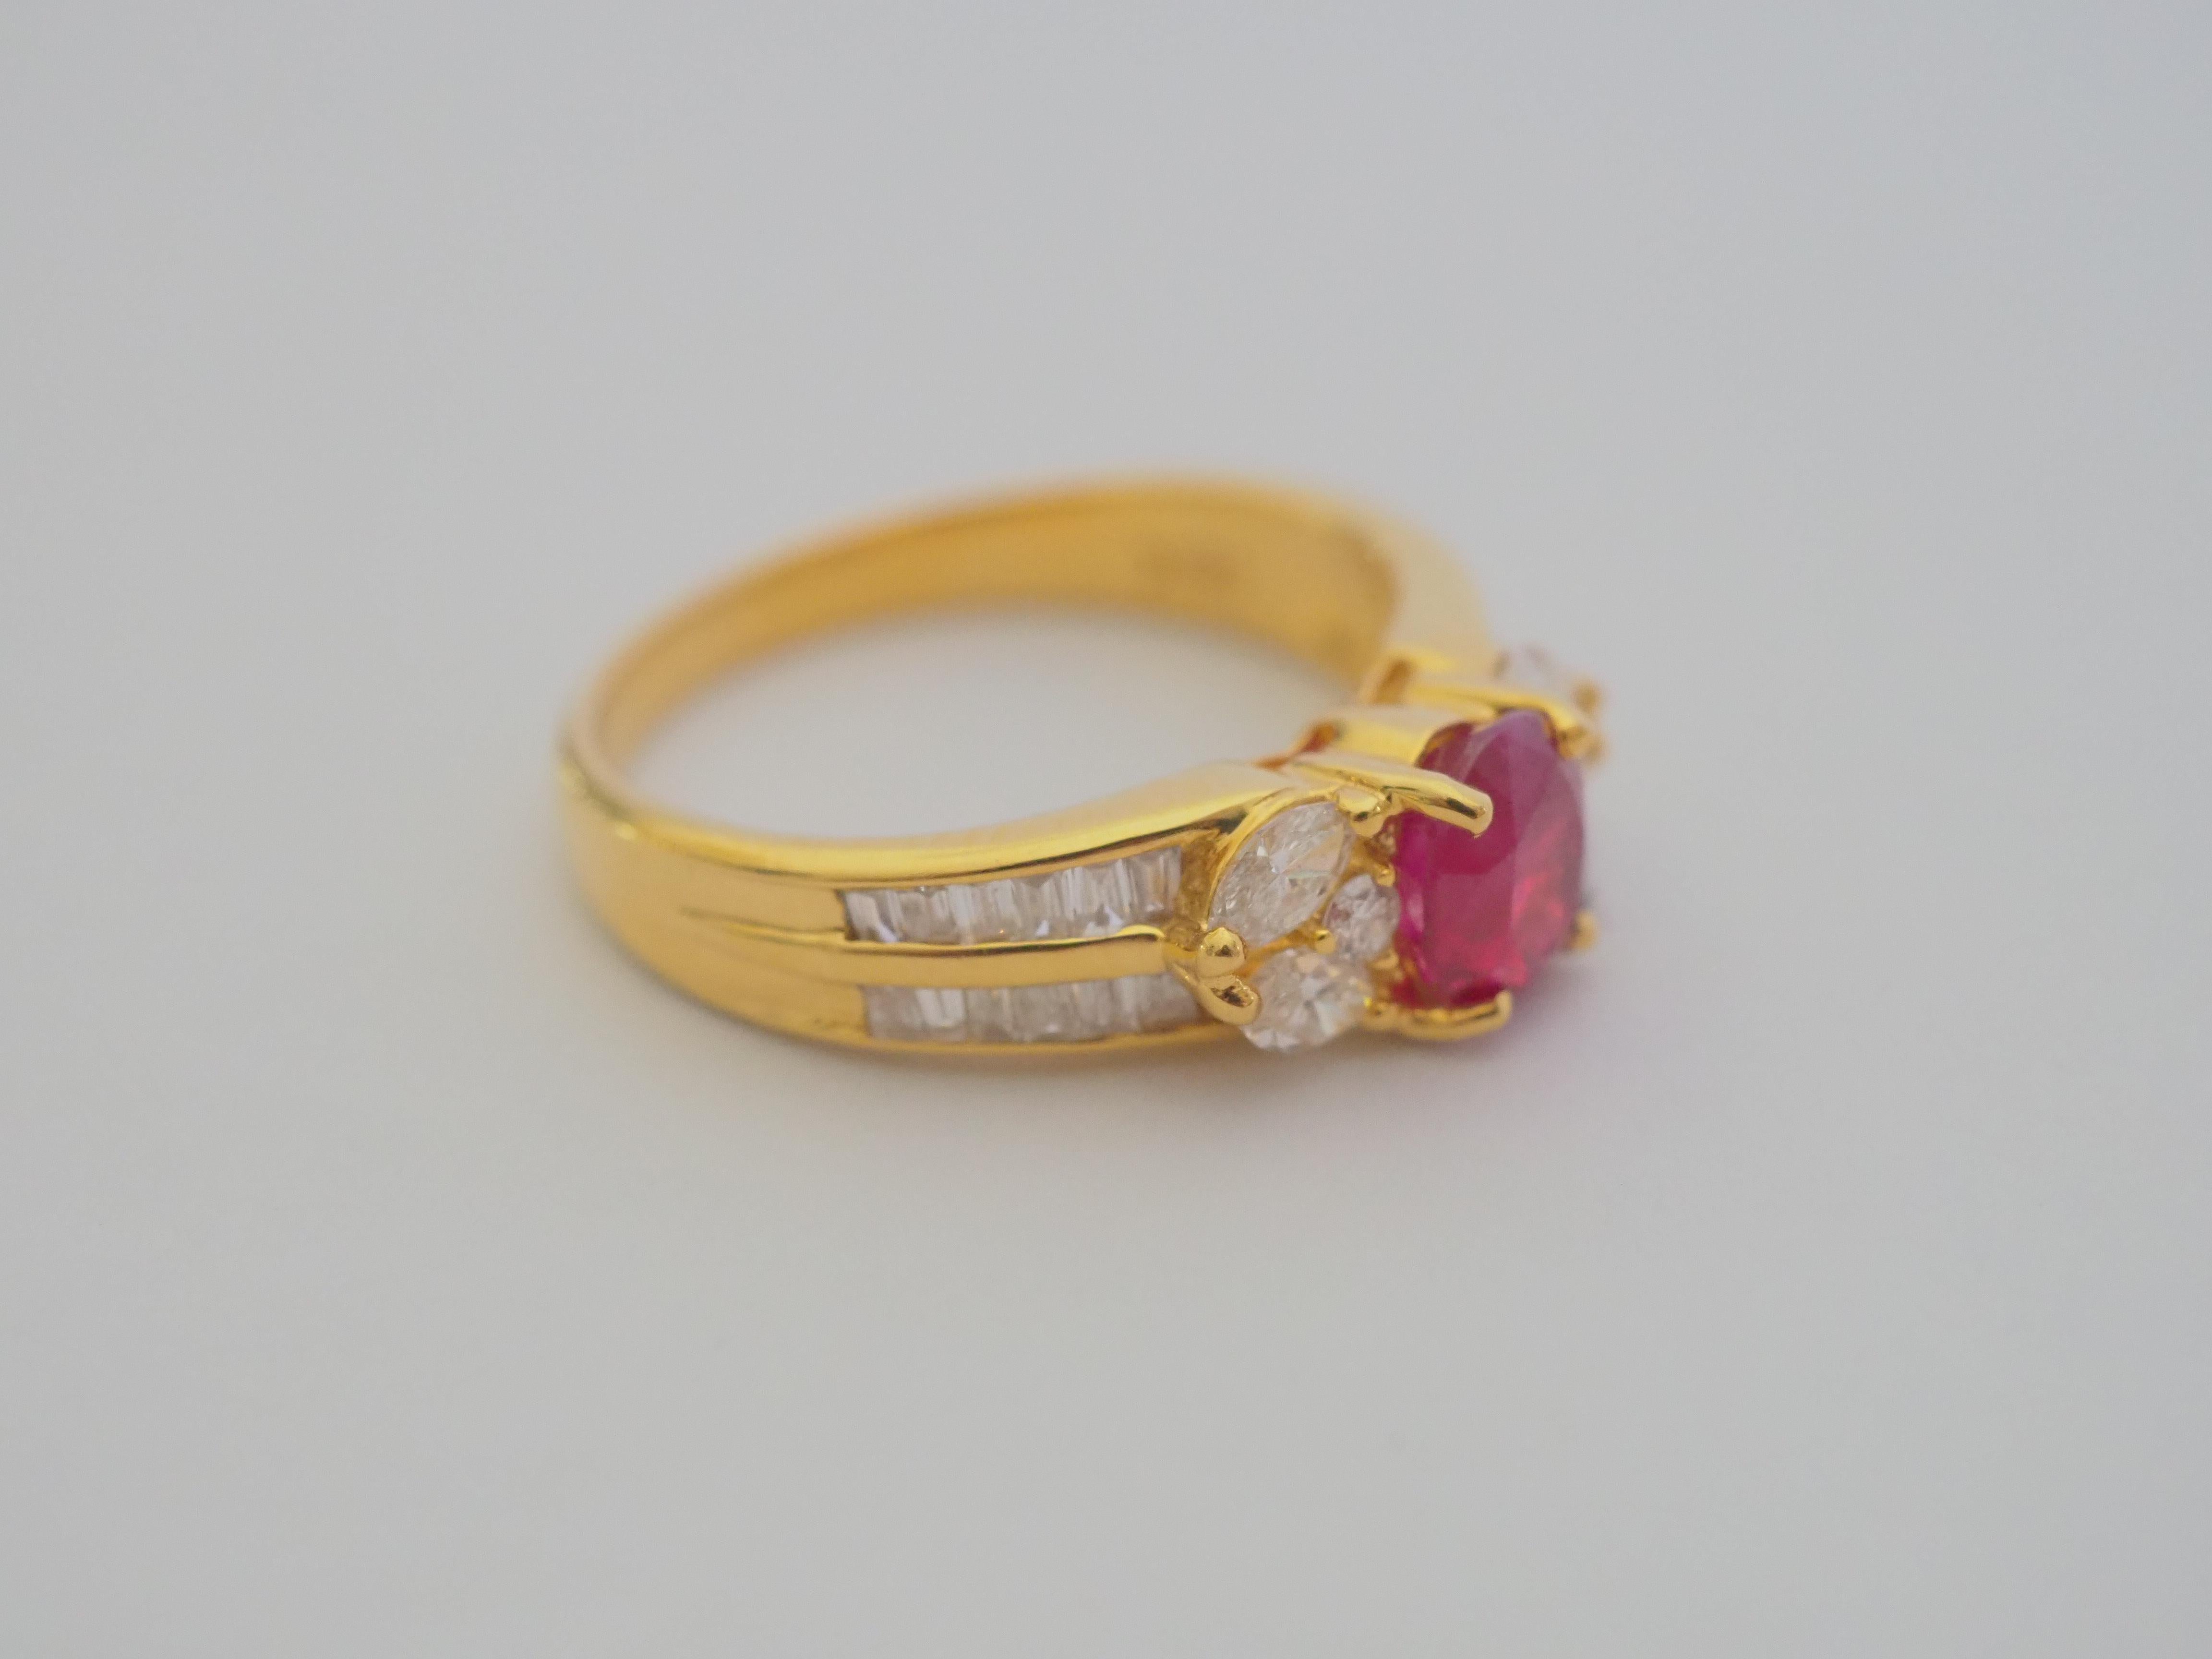 Women's 18K Gold 1.14ct Burma Ruby &0.58ct Assorted Diamonds Cocktail Ring